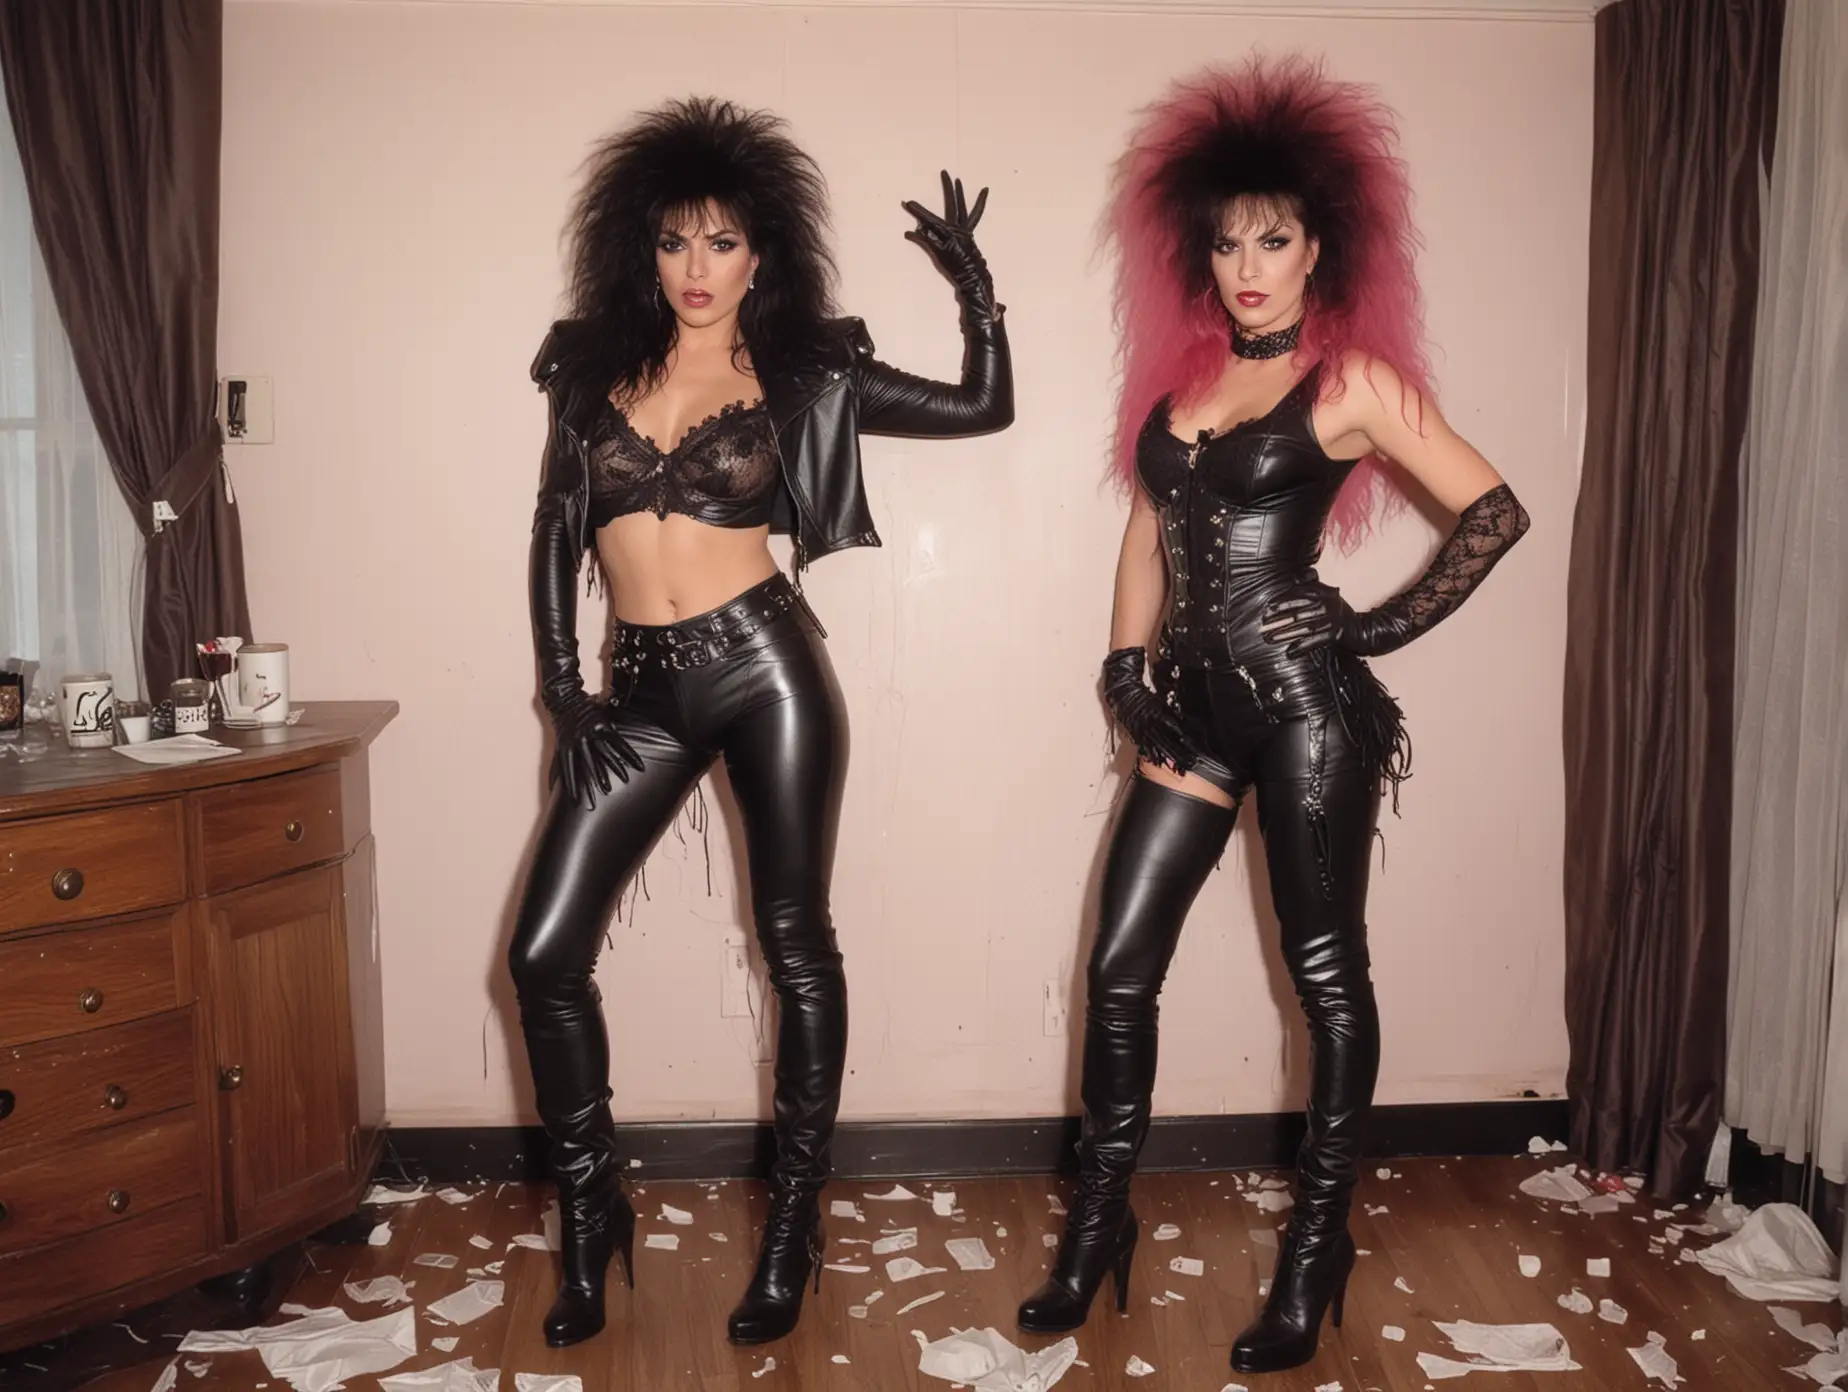 Maxine-Petrucci-of-Madam-X-Band-in-1980s-Rock-Attire-Standing-in-TrashFilled-Hotel-Room